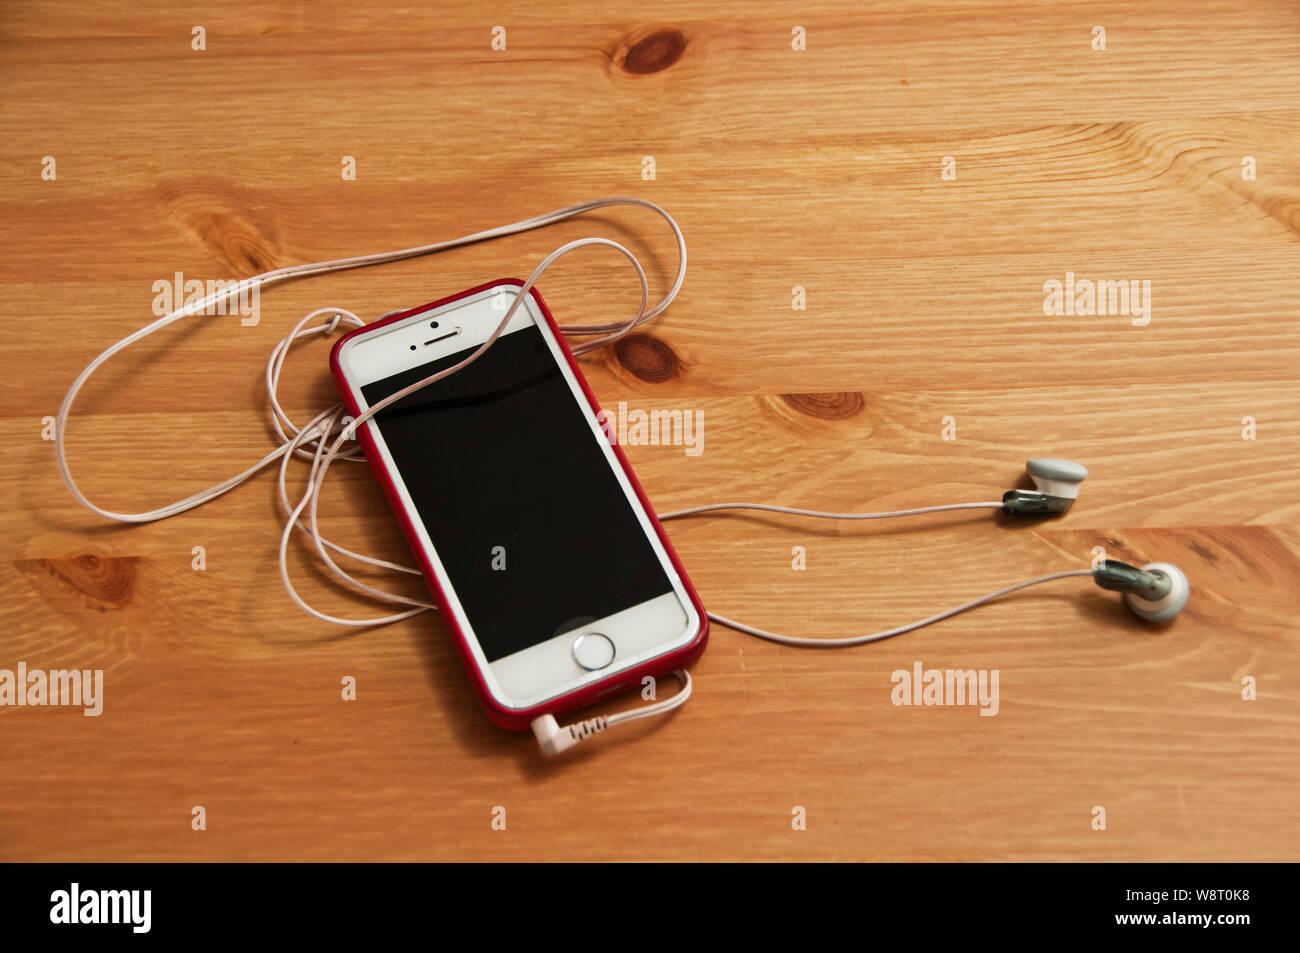 top down view of an iPhone and earpiece lying on a table Stock Photo